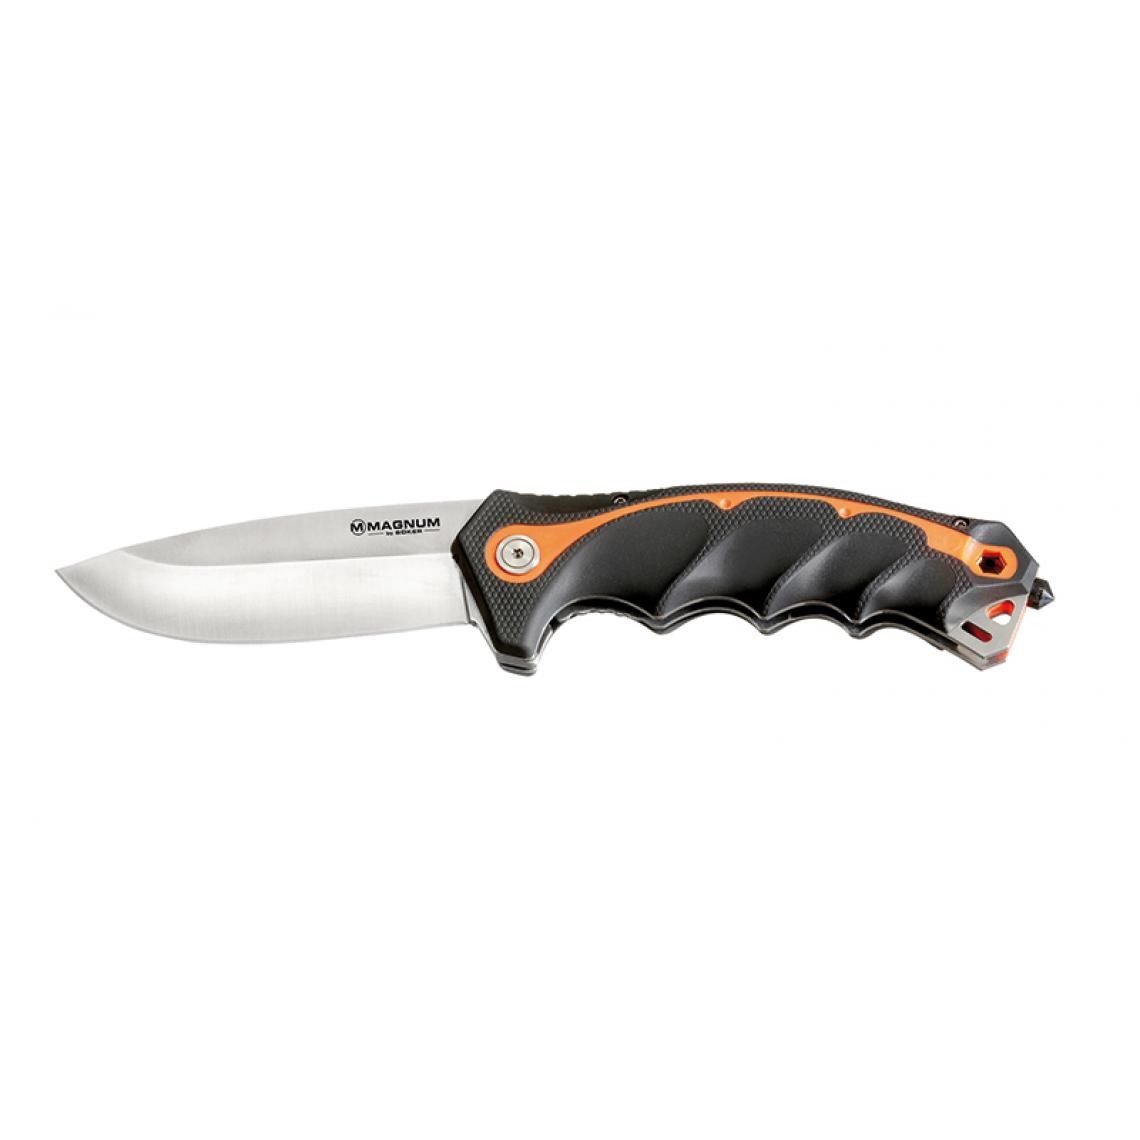 Boker - BOKER MAGNUM - 01RY294 - CHAINSAW ATTENDANT SATIN - Outils de coupe